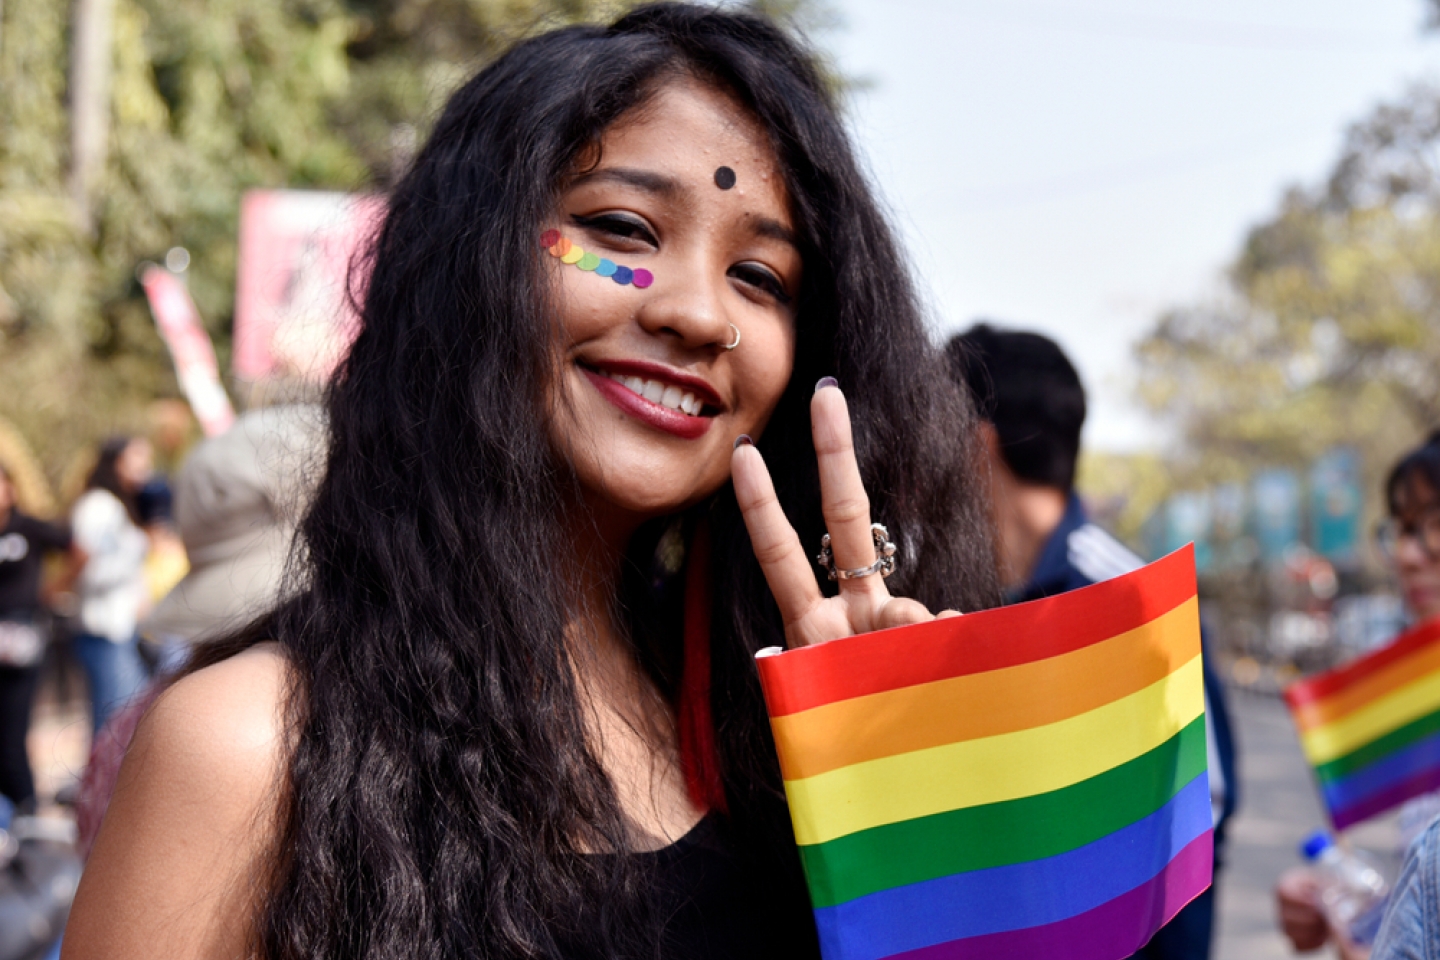 supporter of the lesbian, gay, bisexual, transgender (LGBT) community take part in a pride parade